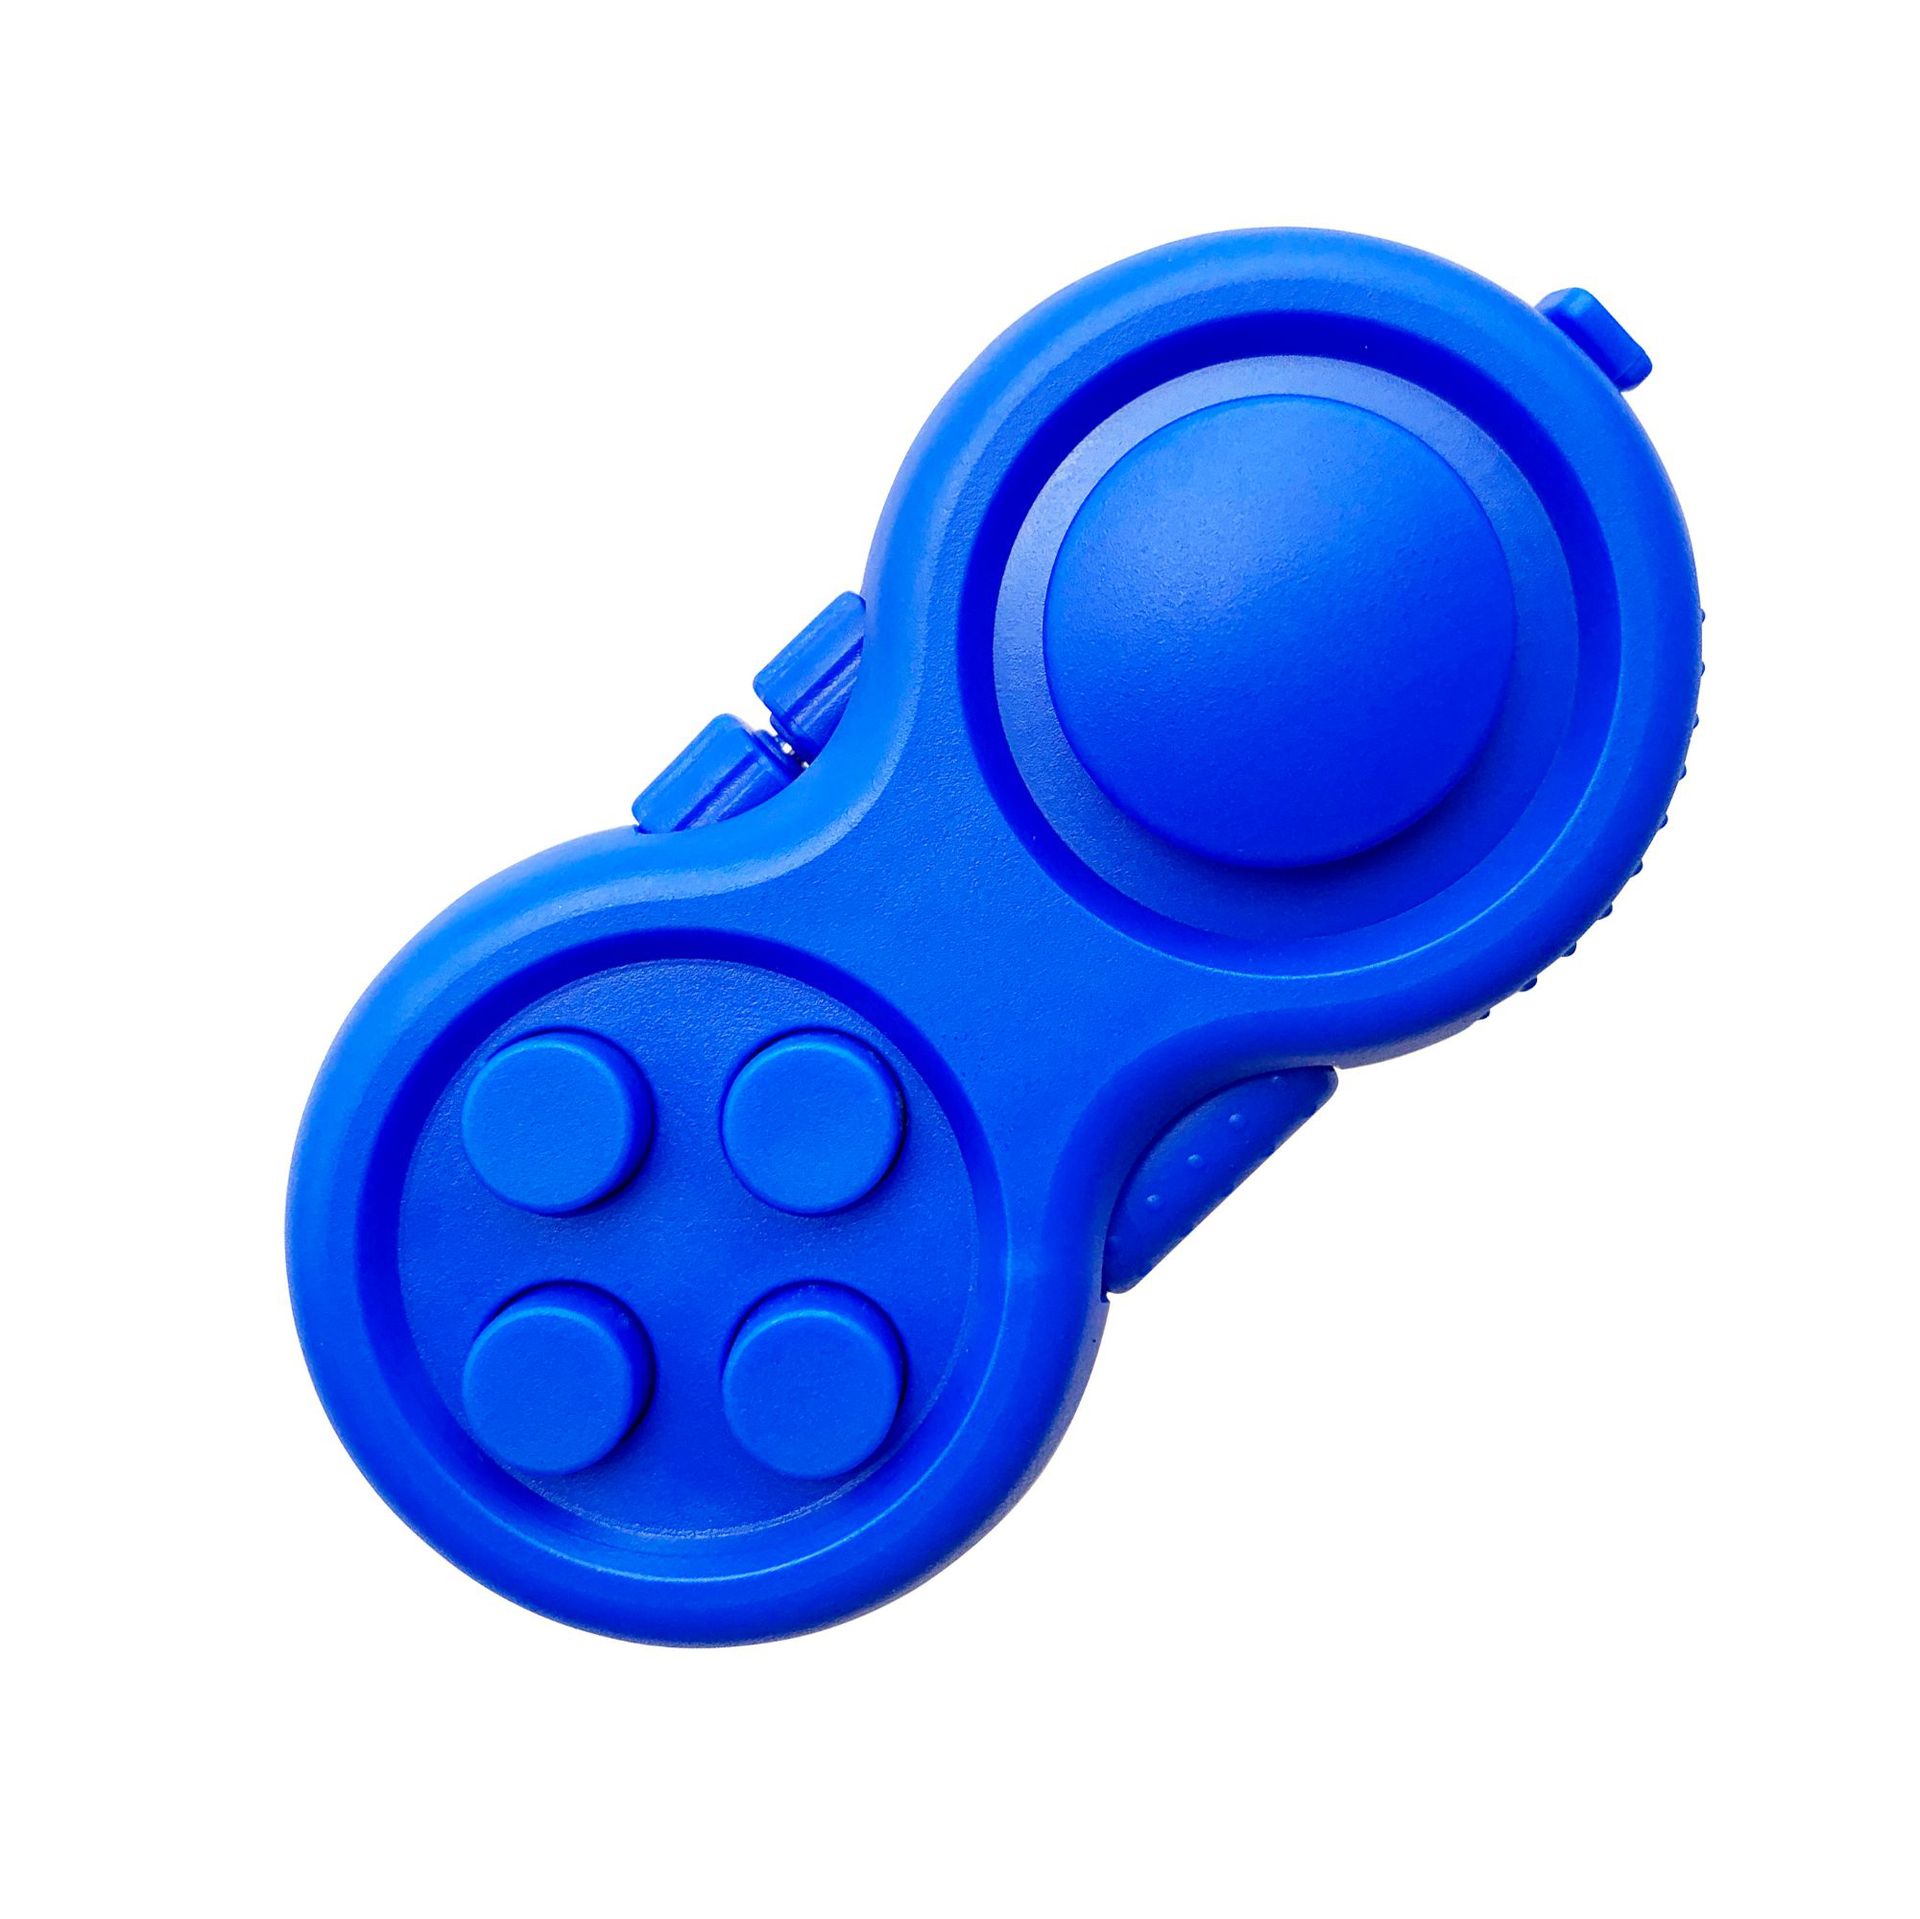 Game Pad Fidget Toy Decompression Gift Plastic Finger Toy Reliever Stress Hand Fidget Pad Classic Controller 5 - Fidget Pad